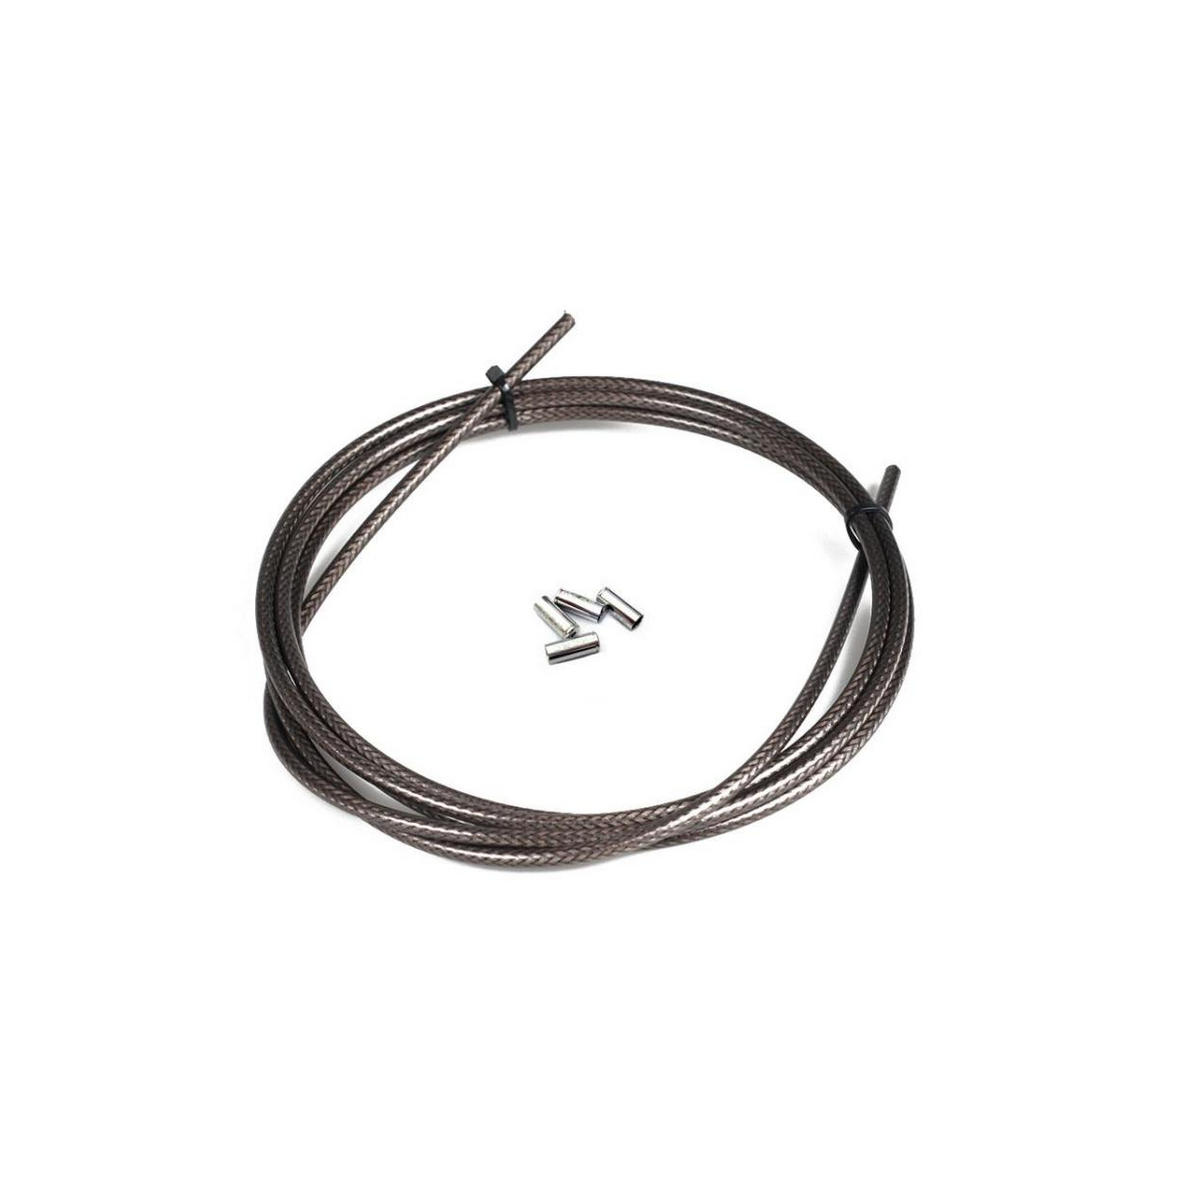 brake cable outer housing 5mm x 2,5m carbon black